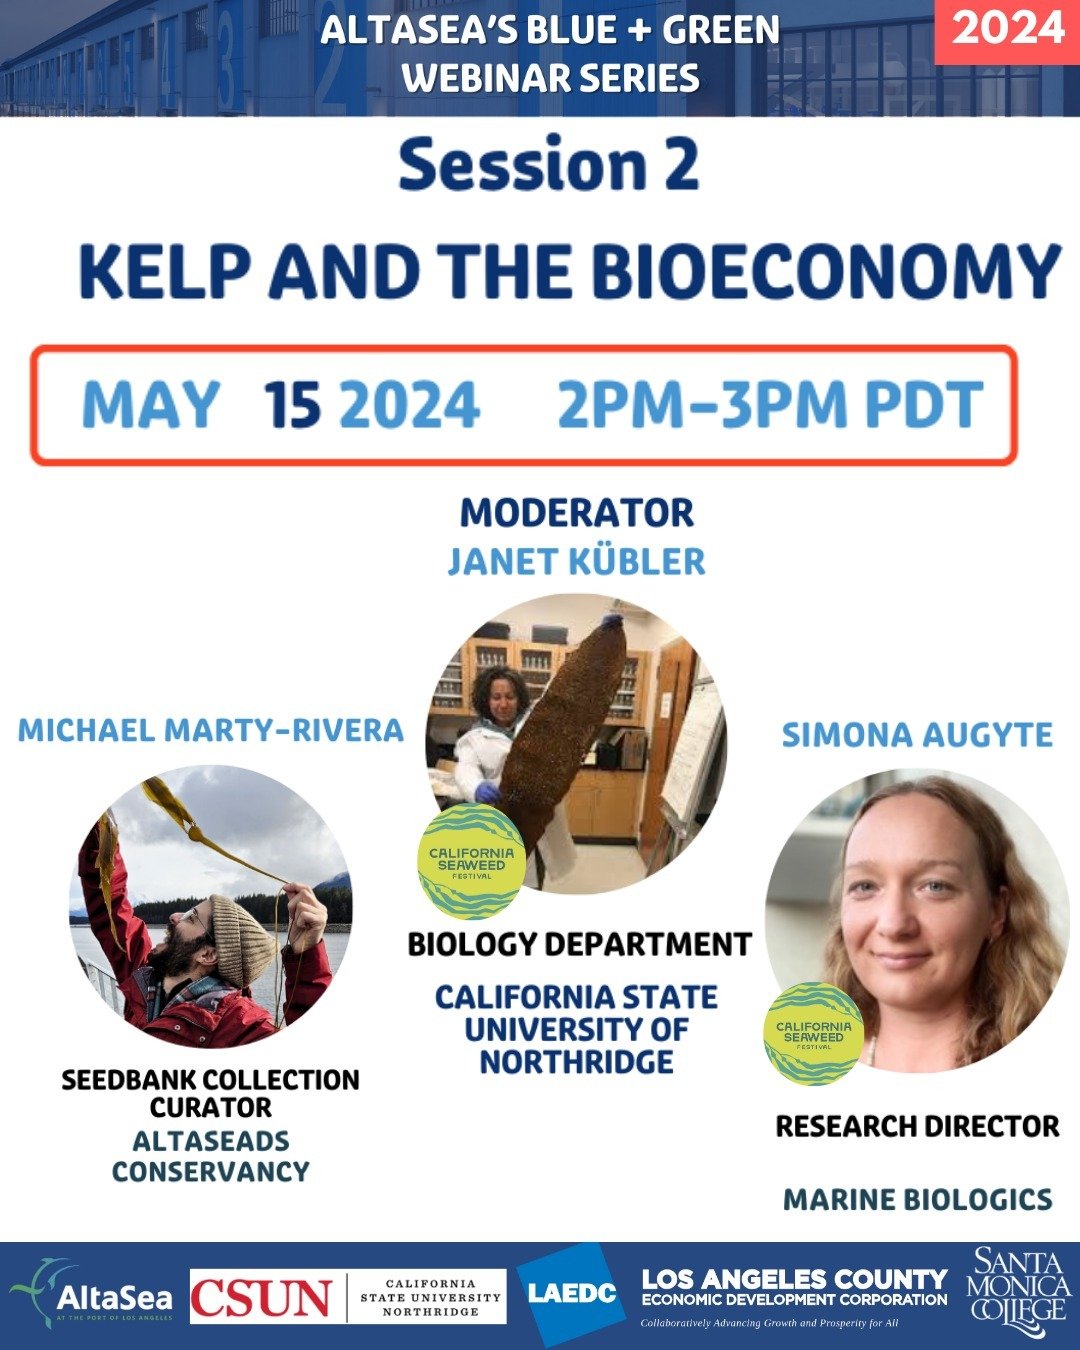 Check out the CA Seaweed Festival Founders on @altasea Blue + Green Webinar Series discussing Kelp and the Bioeconomy. You can find the link in their Bio!!!